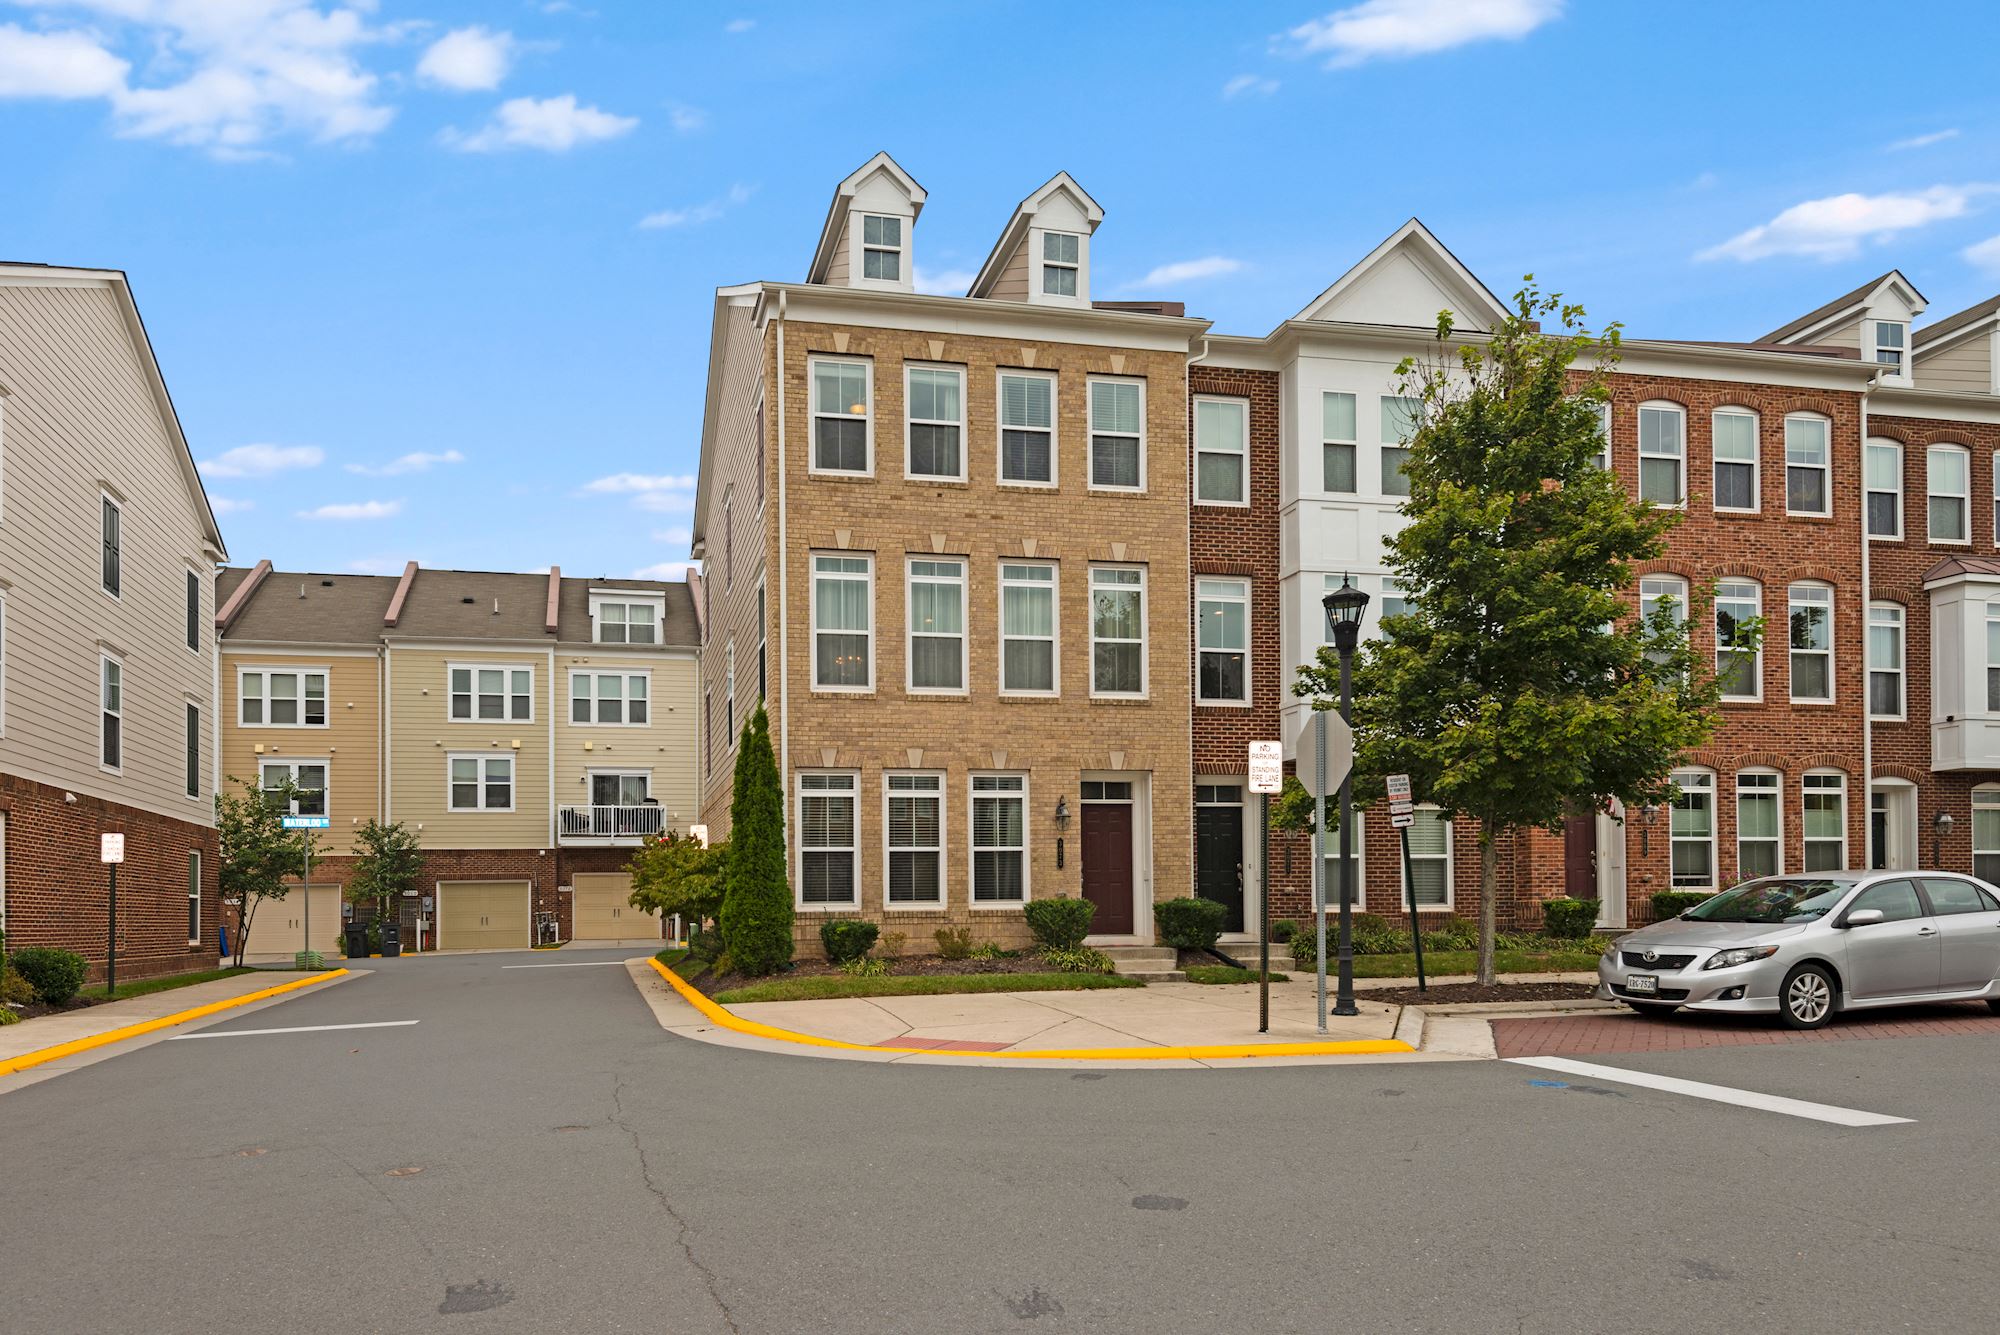 SOLD: Gorgeous, End-Unit Townhouse in the Desirable Community of Metro West Fairfax,VA